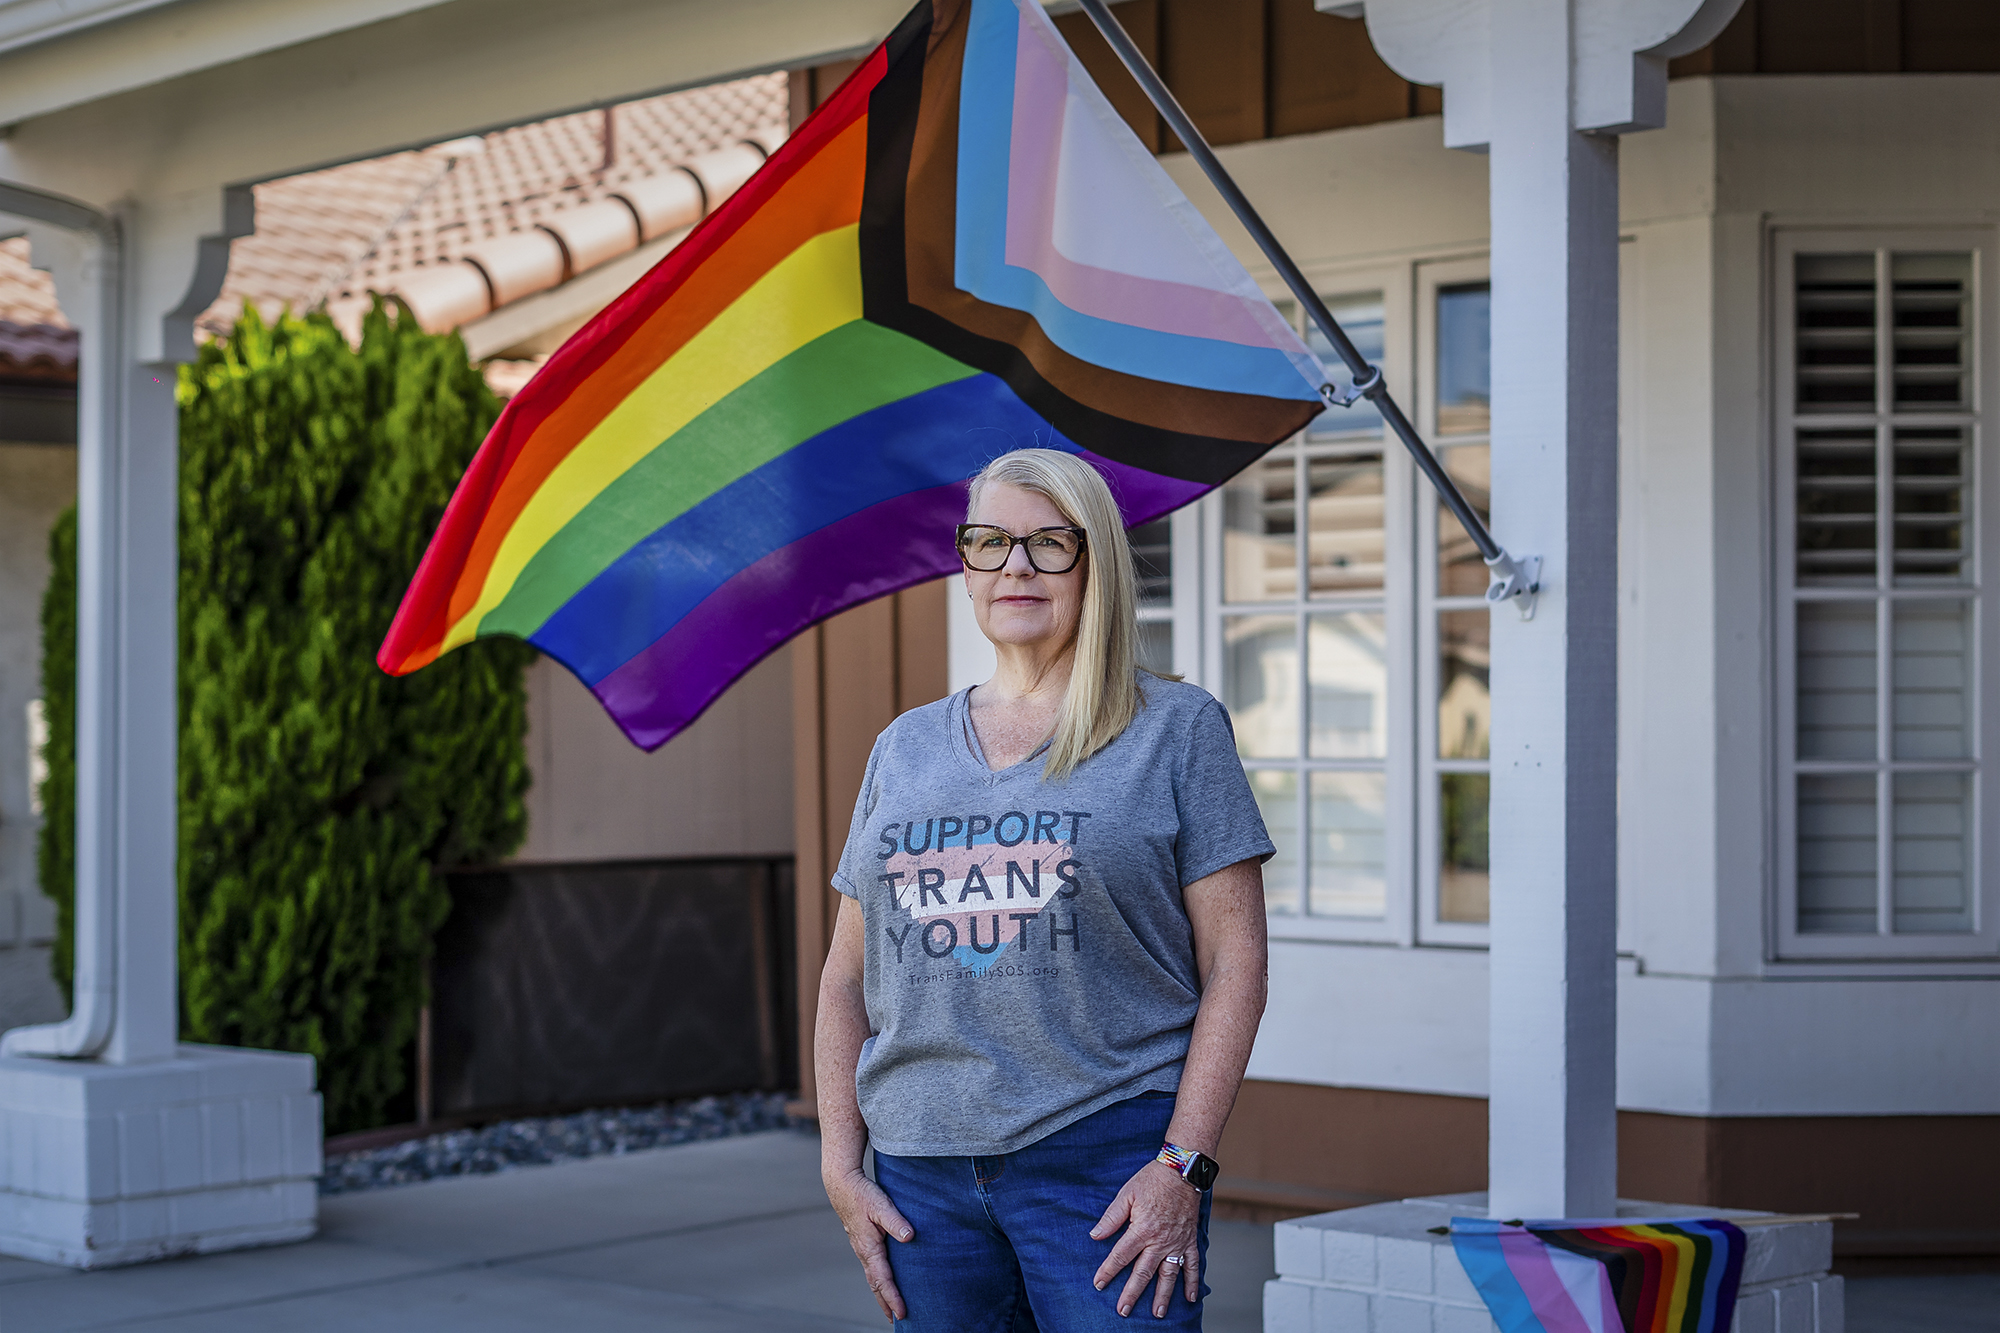 Kathie Moehlig at her home in Rancho Bernardo in San Diego on Aug. 26, 2022. Photo by Ariana Drehsler for CalMatters